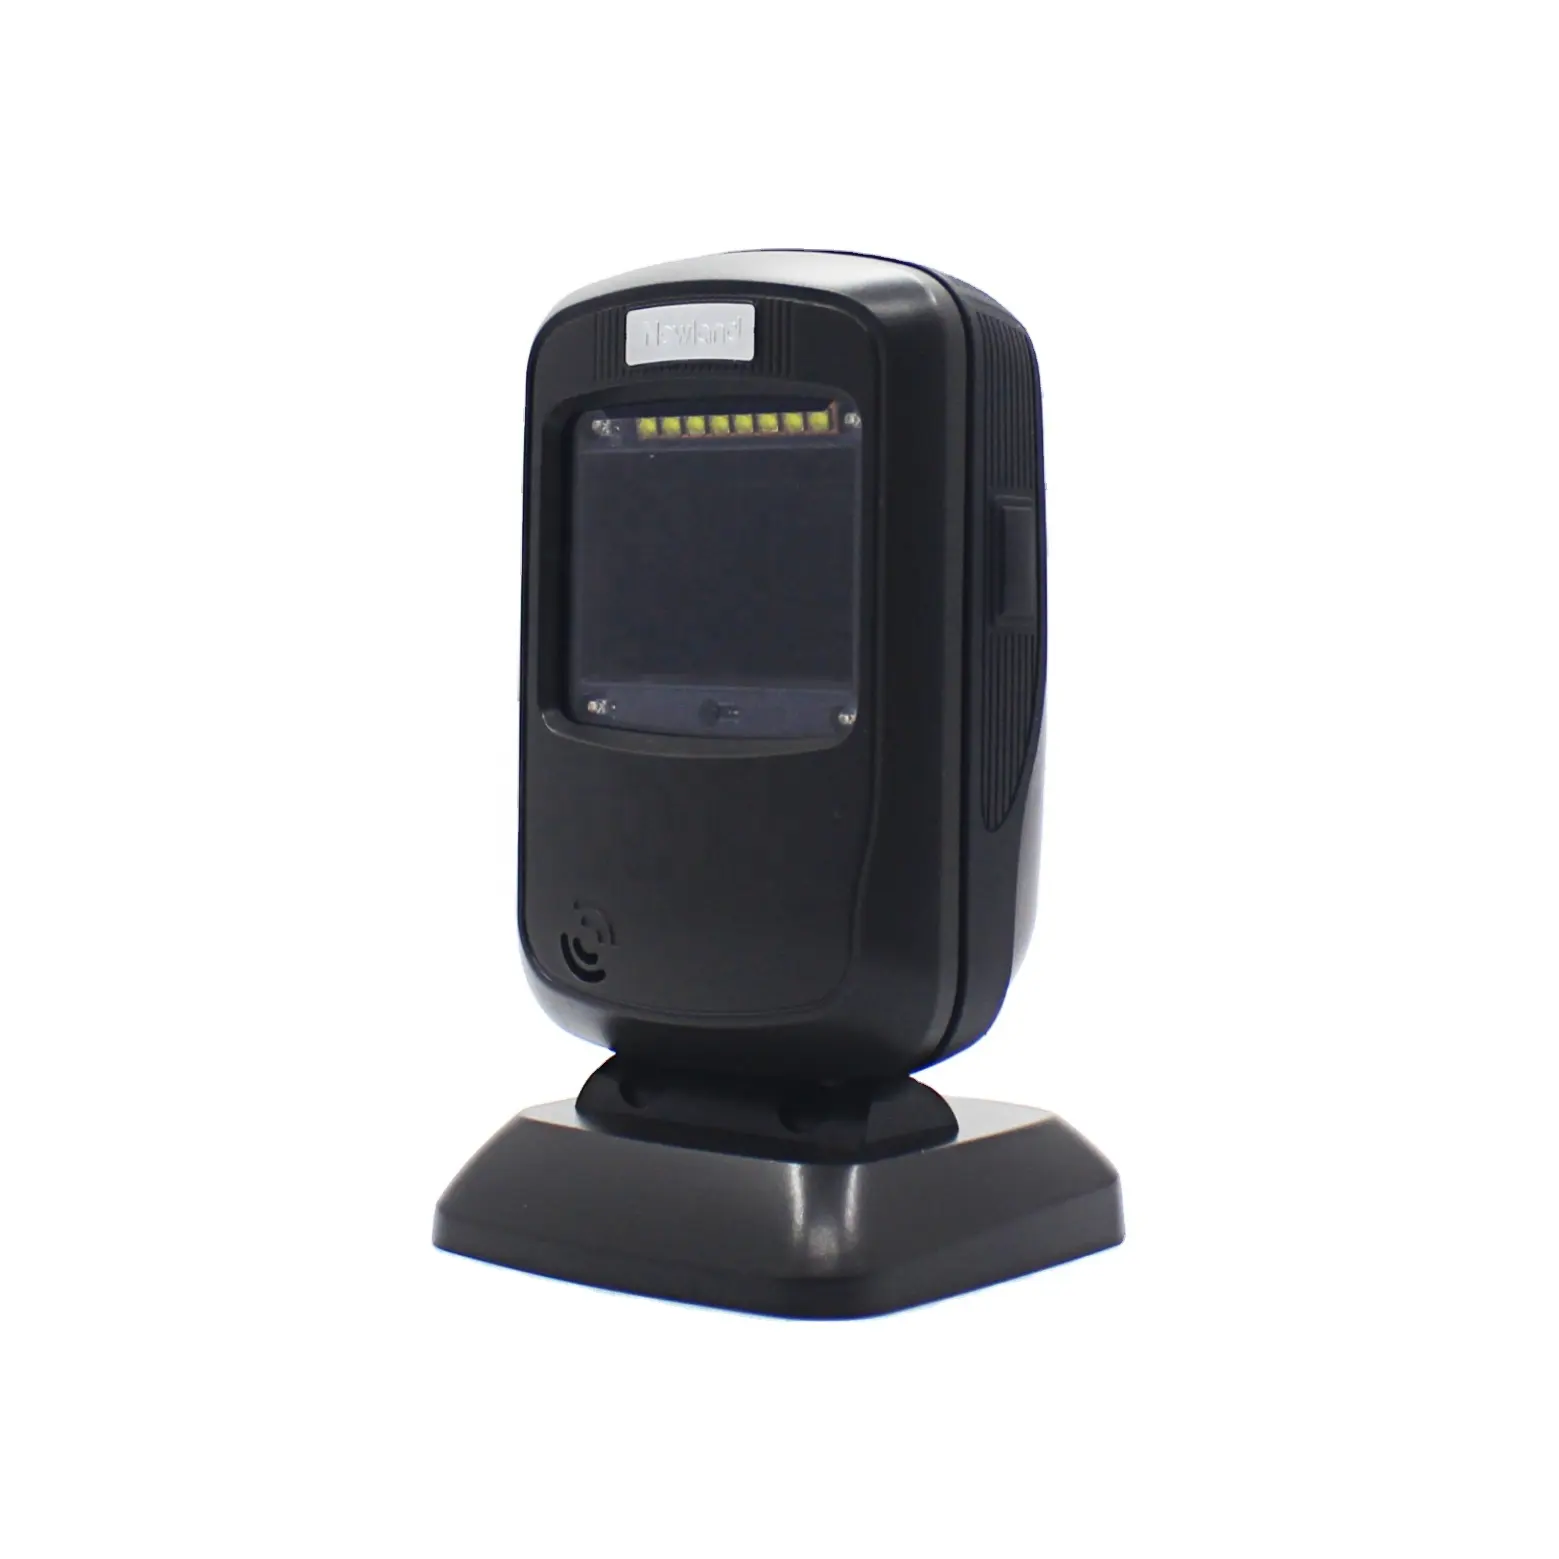 Juxing NLS-FR40 Fixed bar code scanner for cashier of supermarkets convenience stores electronic ticket inspection window